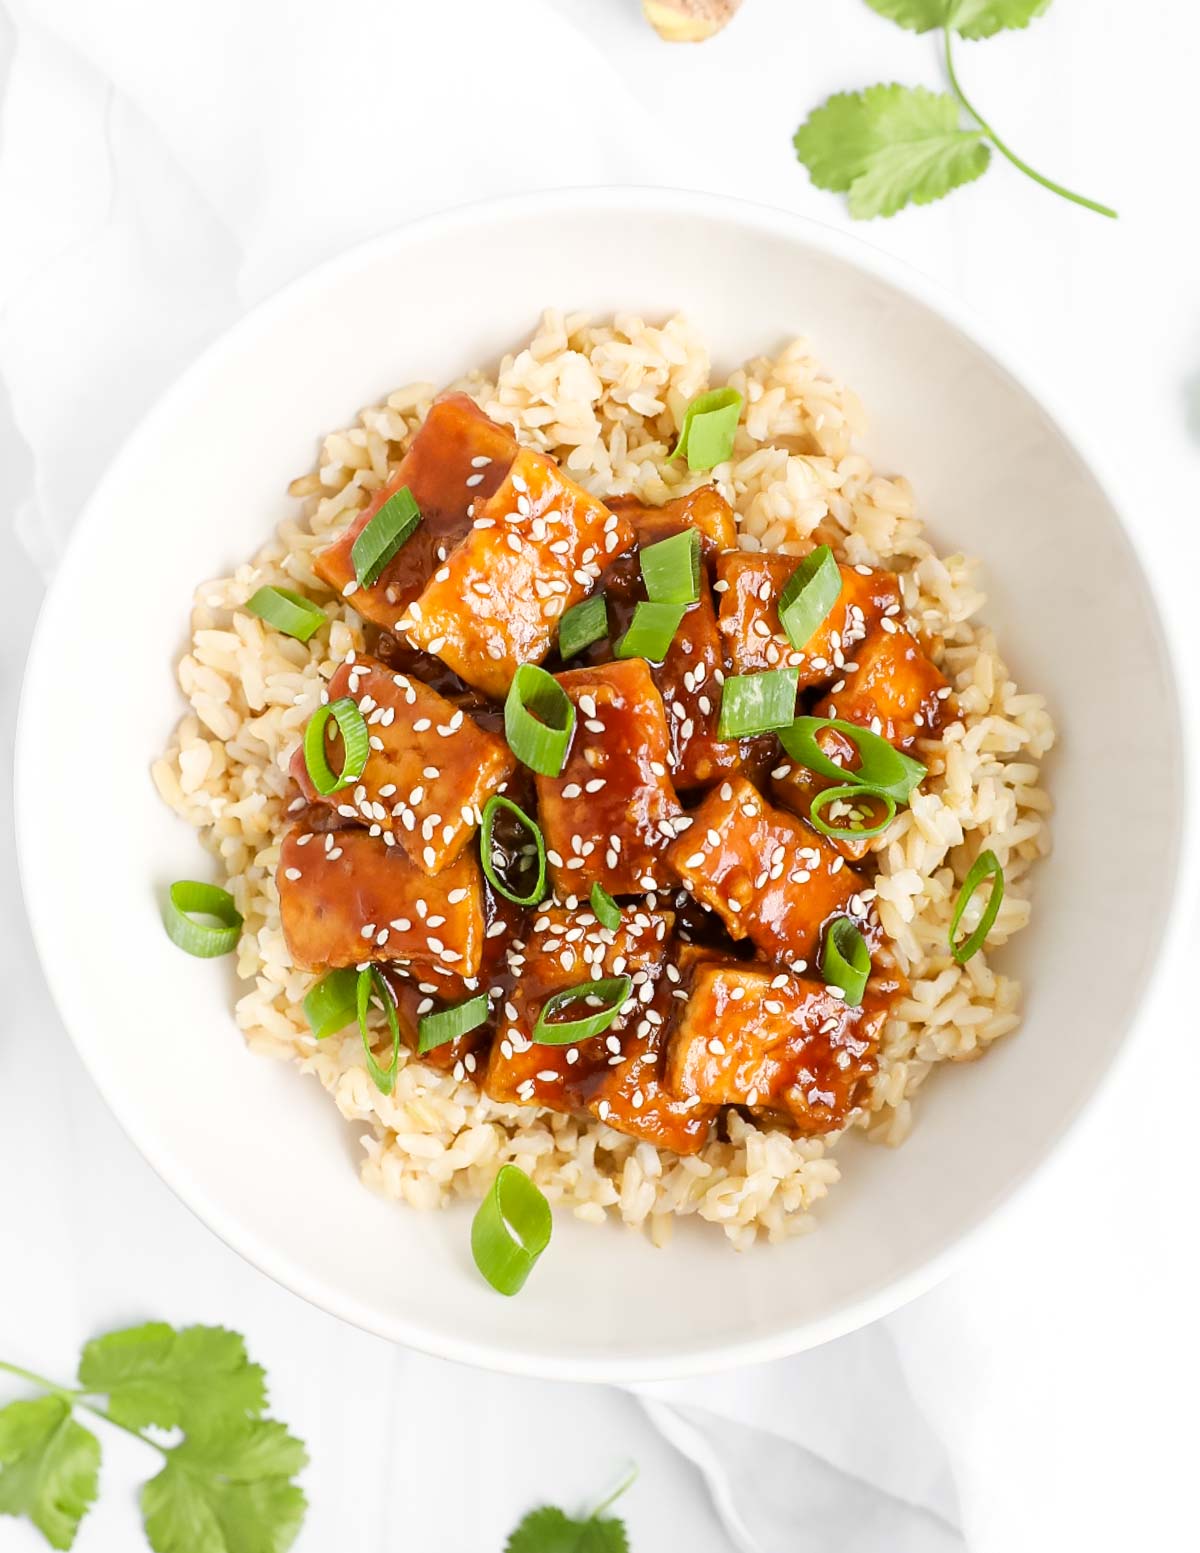 Sauce-coated tofu over cooked rice that is garnished with sesame seeds and green onion slices.